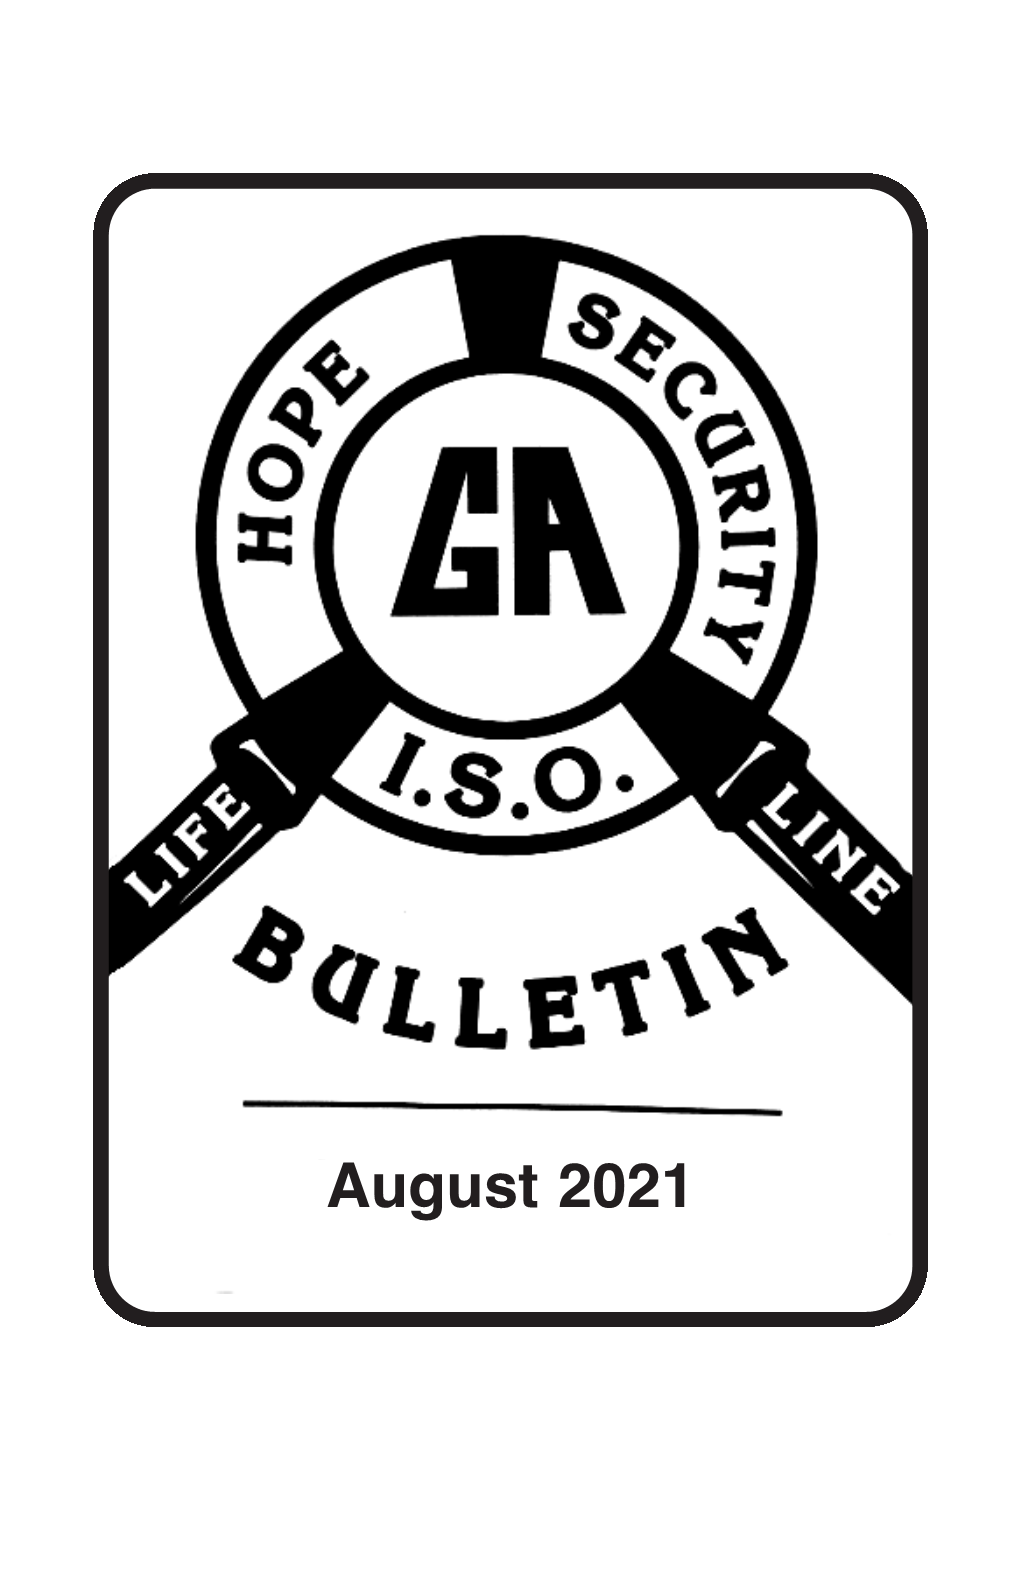 August 2021 GAMBLERS ANONYMOUS LIFE-LINE YEARLY BULLETIN SUBSCRIPTION FORM